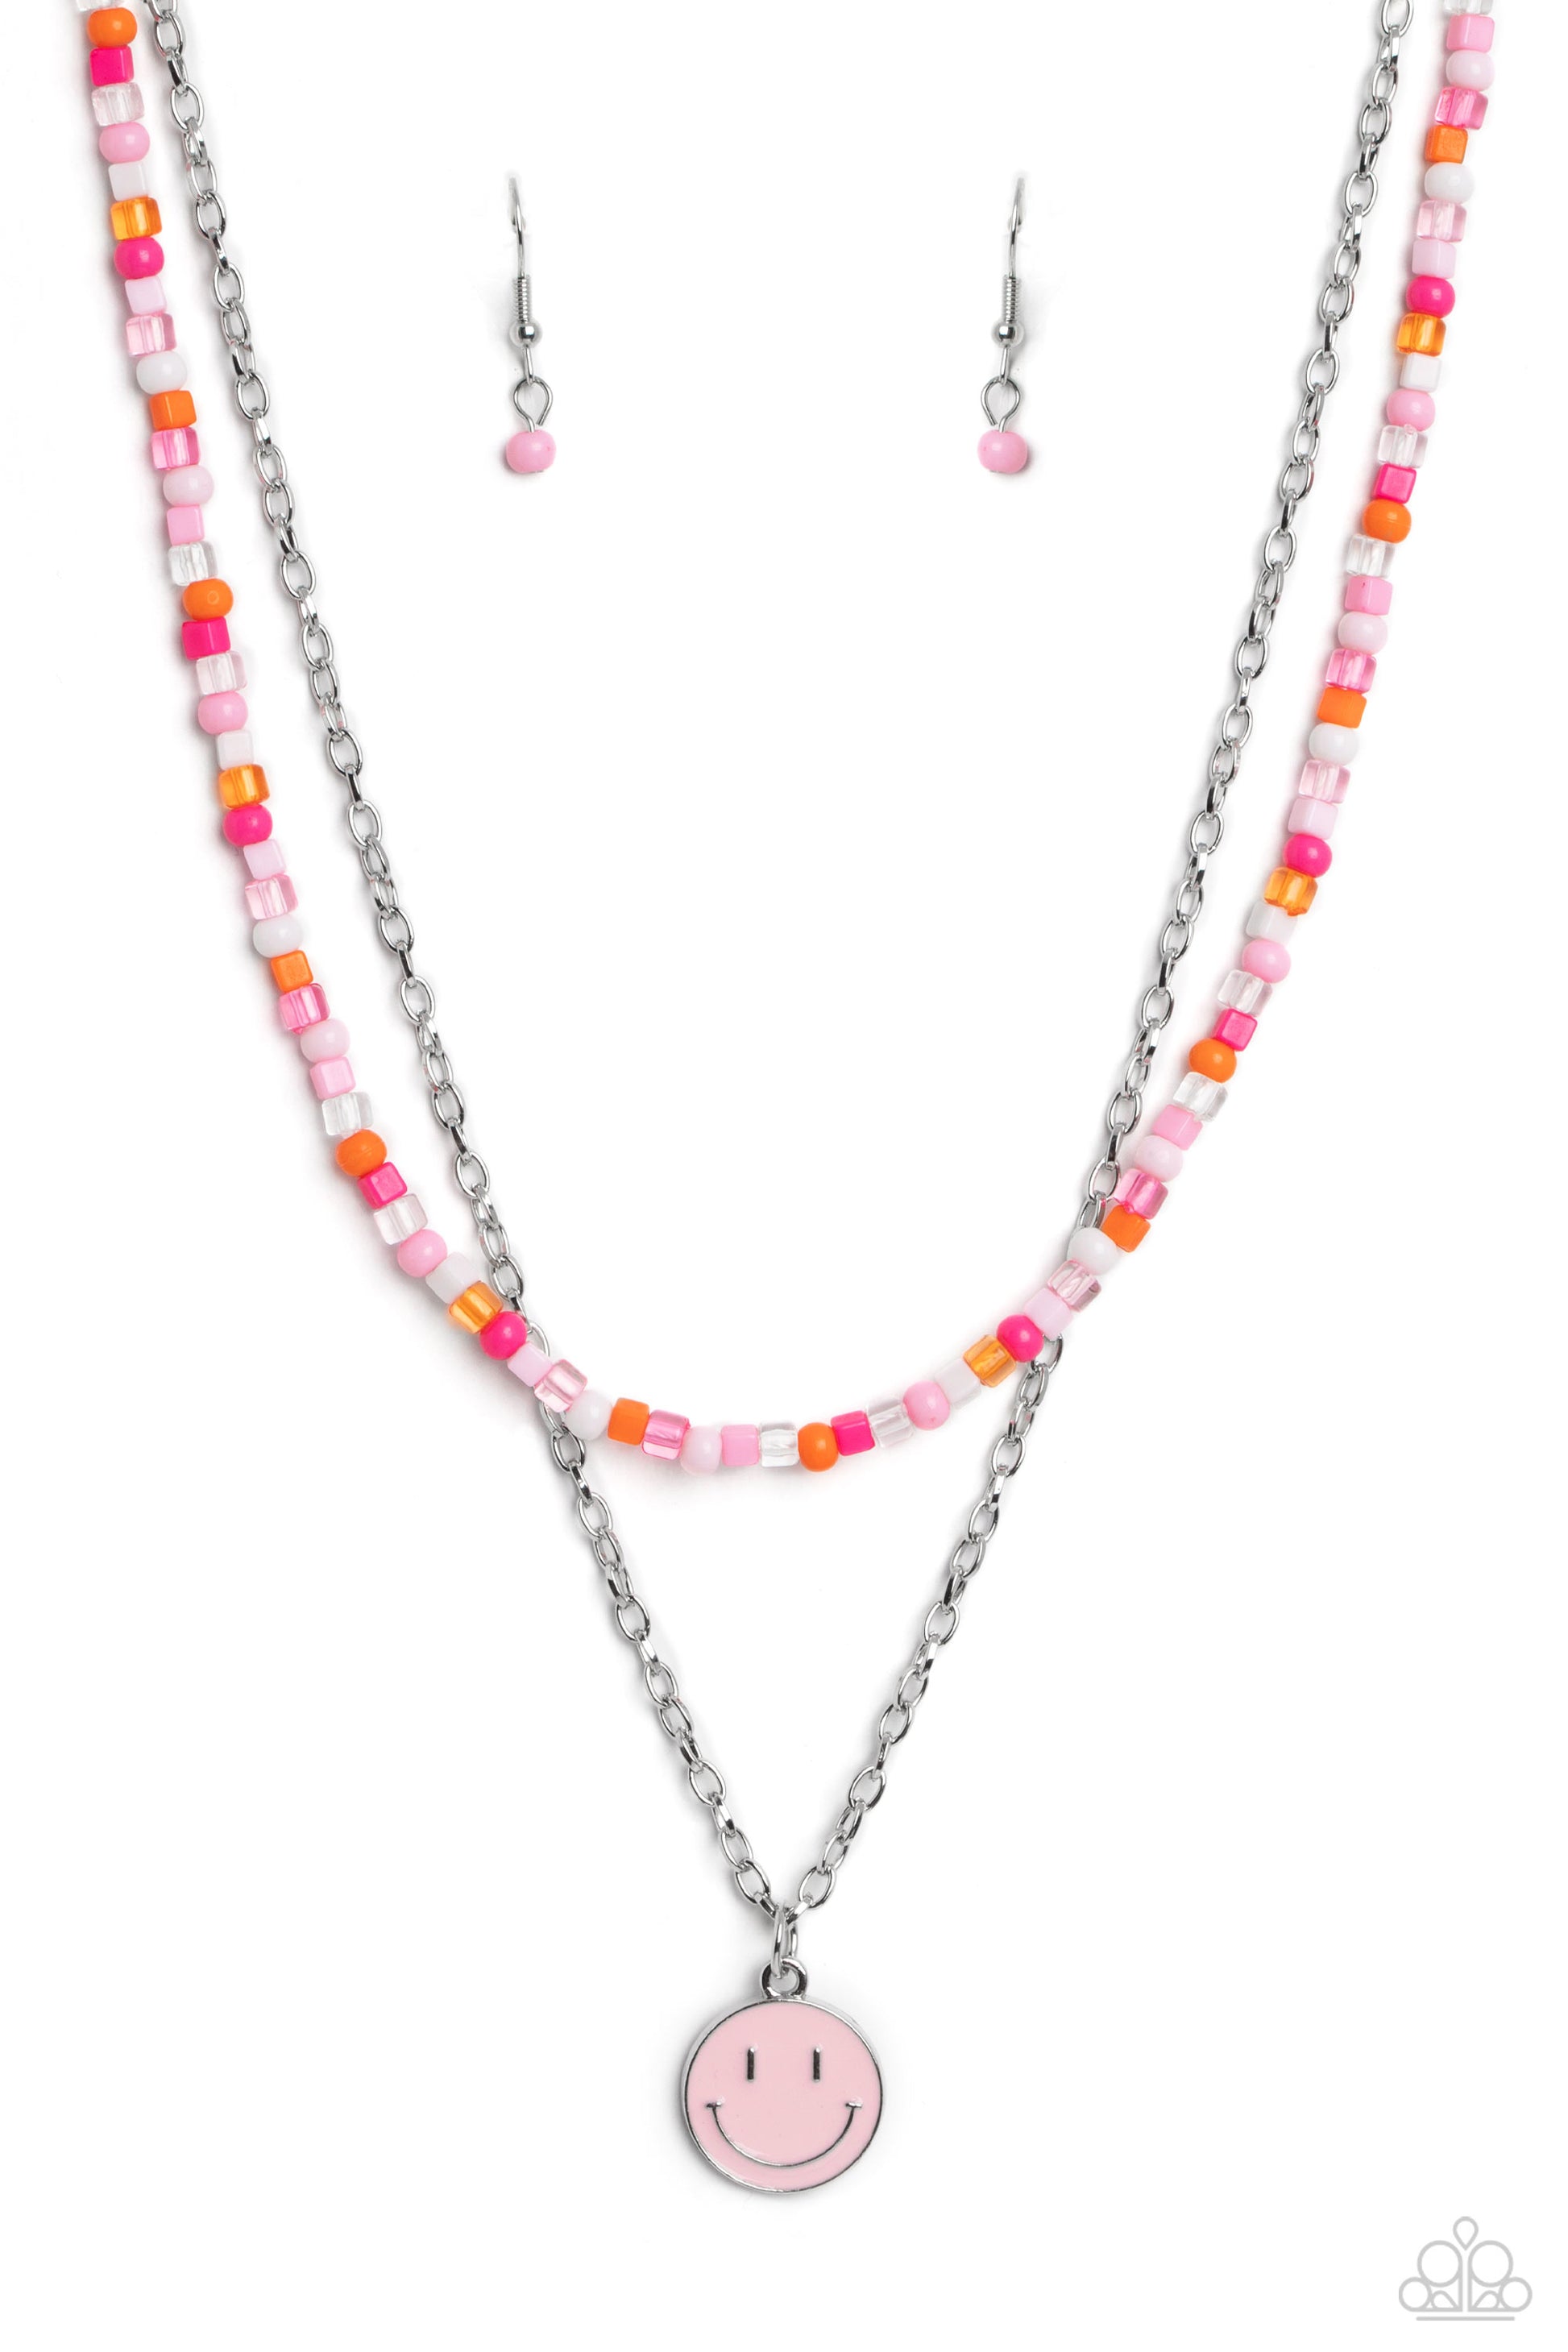 Paparazzi Accessories - High School Reunion - Pink Smiley Necklace Gliding from a dainty, silver chain, a smiley face pendant stands out against a pink backdrop. Completing the charismatic ensemble, a collection of seed beads in shades of light pink, white, pink, orange, and hot pink create bright pops of color around the neckline for a youthful finish. Features an adjustable clasp closure.  Sold as one individual necklace. Includes one pair of matching earrings.